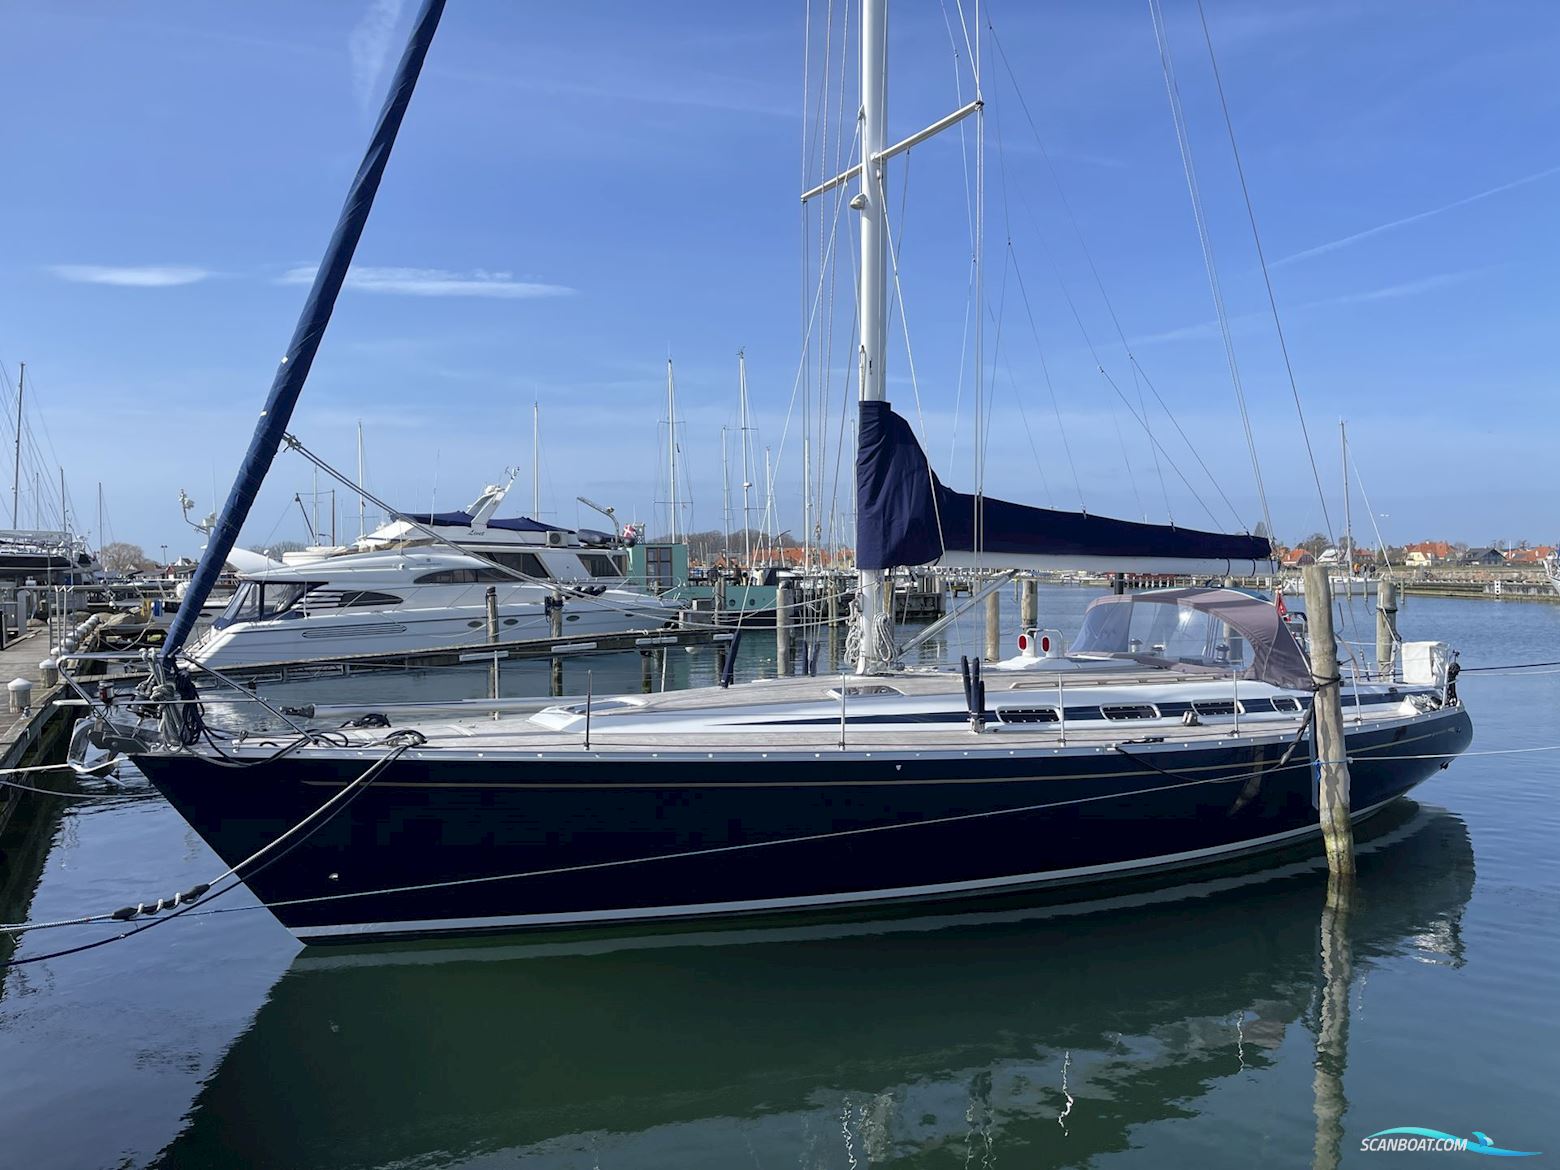 Grand Soleil 46.3 Sailing boat 1997, with Yanmar 4JH2CE engine, Denmark